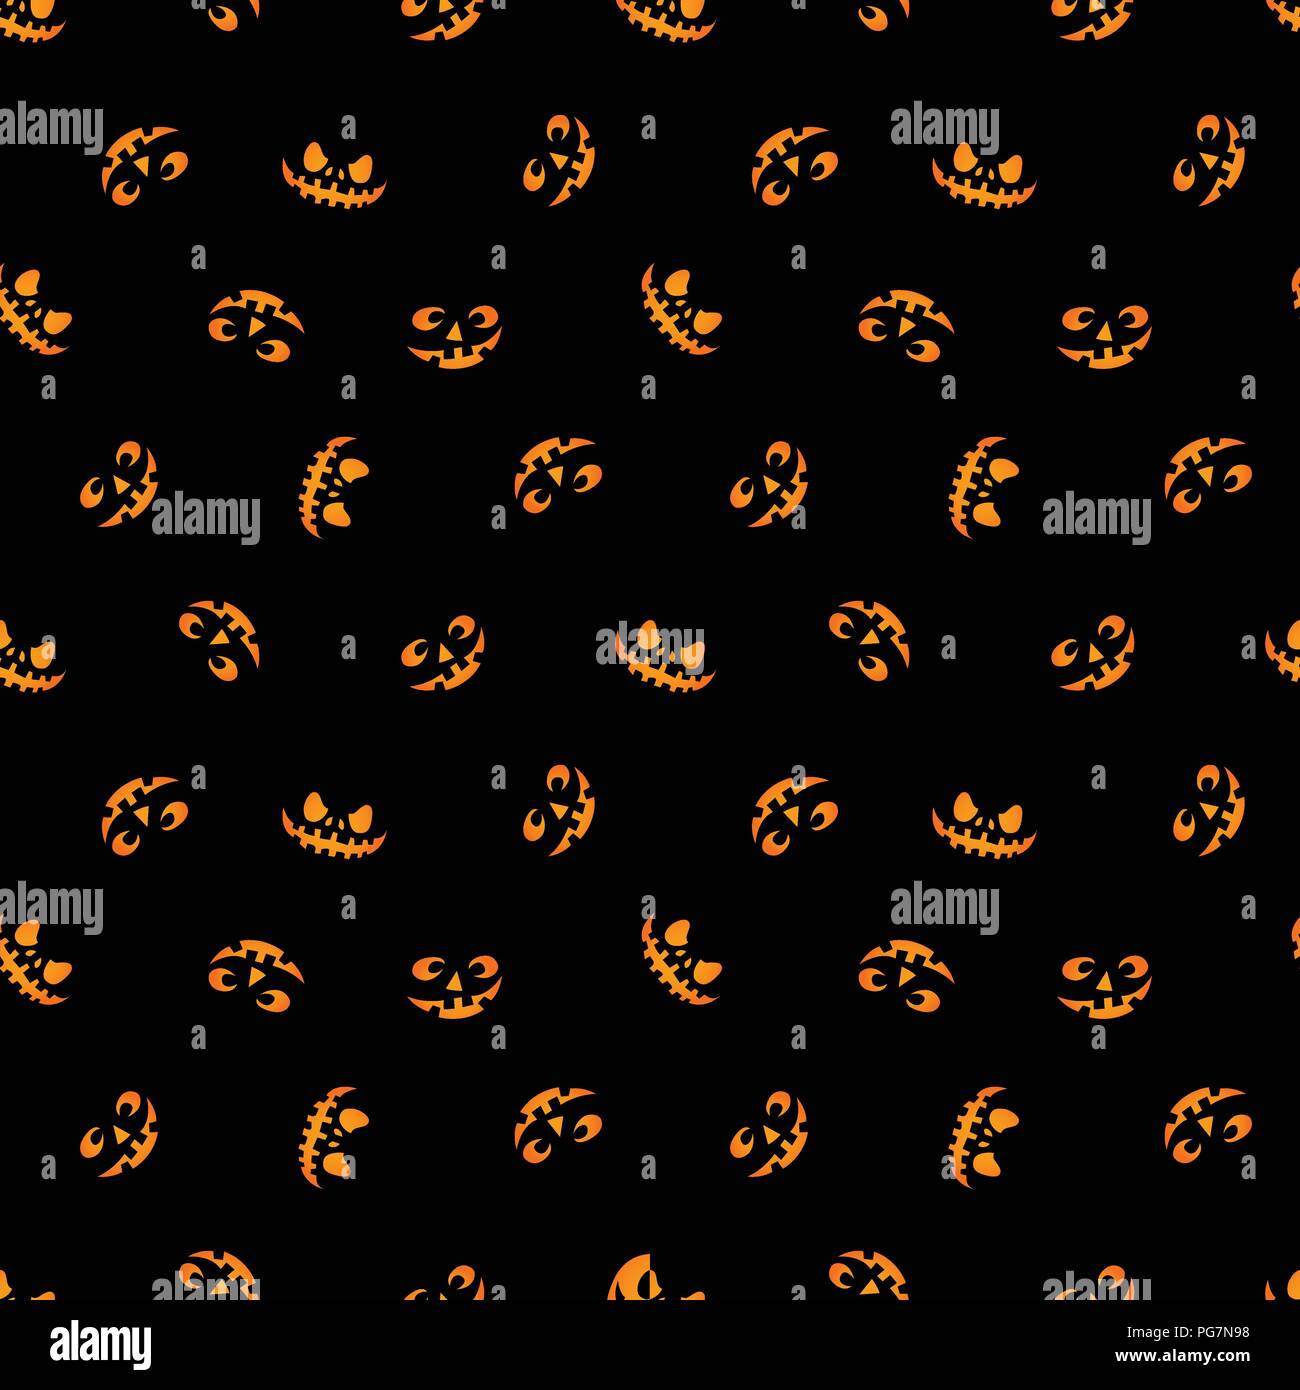 Pumpkin faces glowing on black background. Seamless pattern. Stock Vector